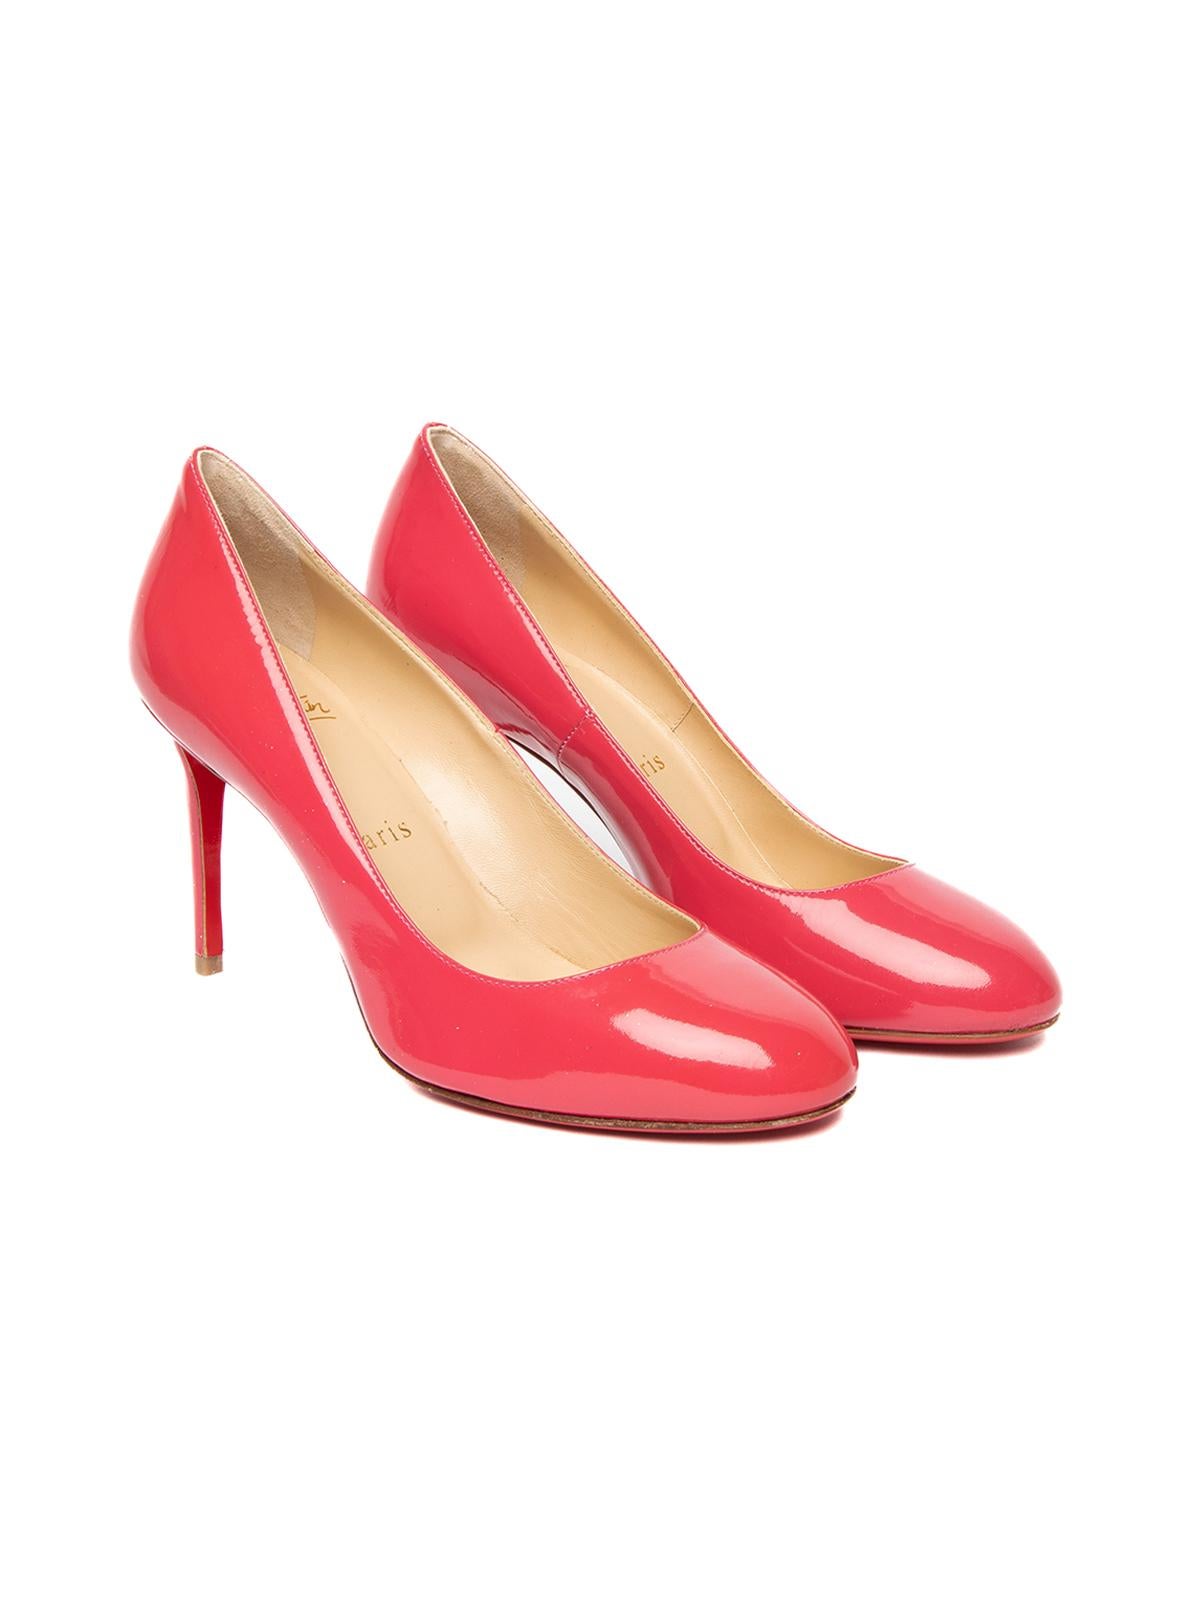 Christian Louboutin Women's Eloise 85 Patent Pumps Pink In Excellent Condition In London, GB